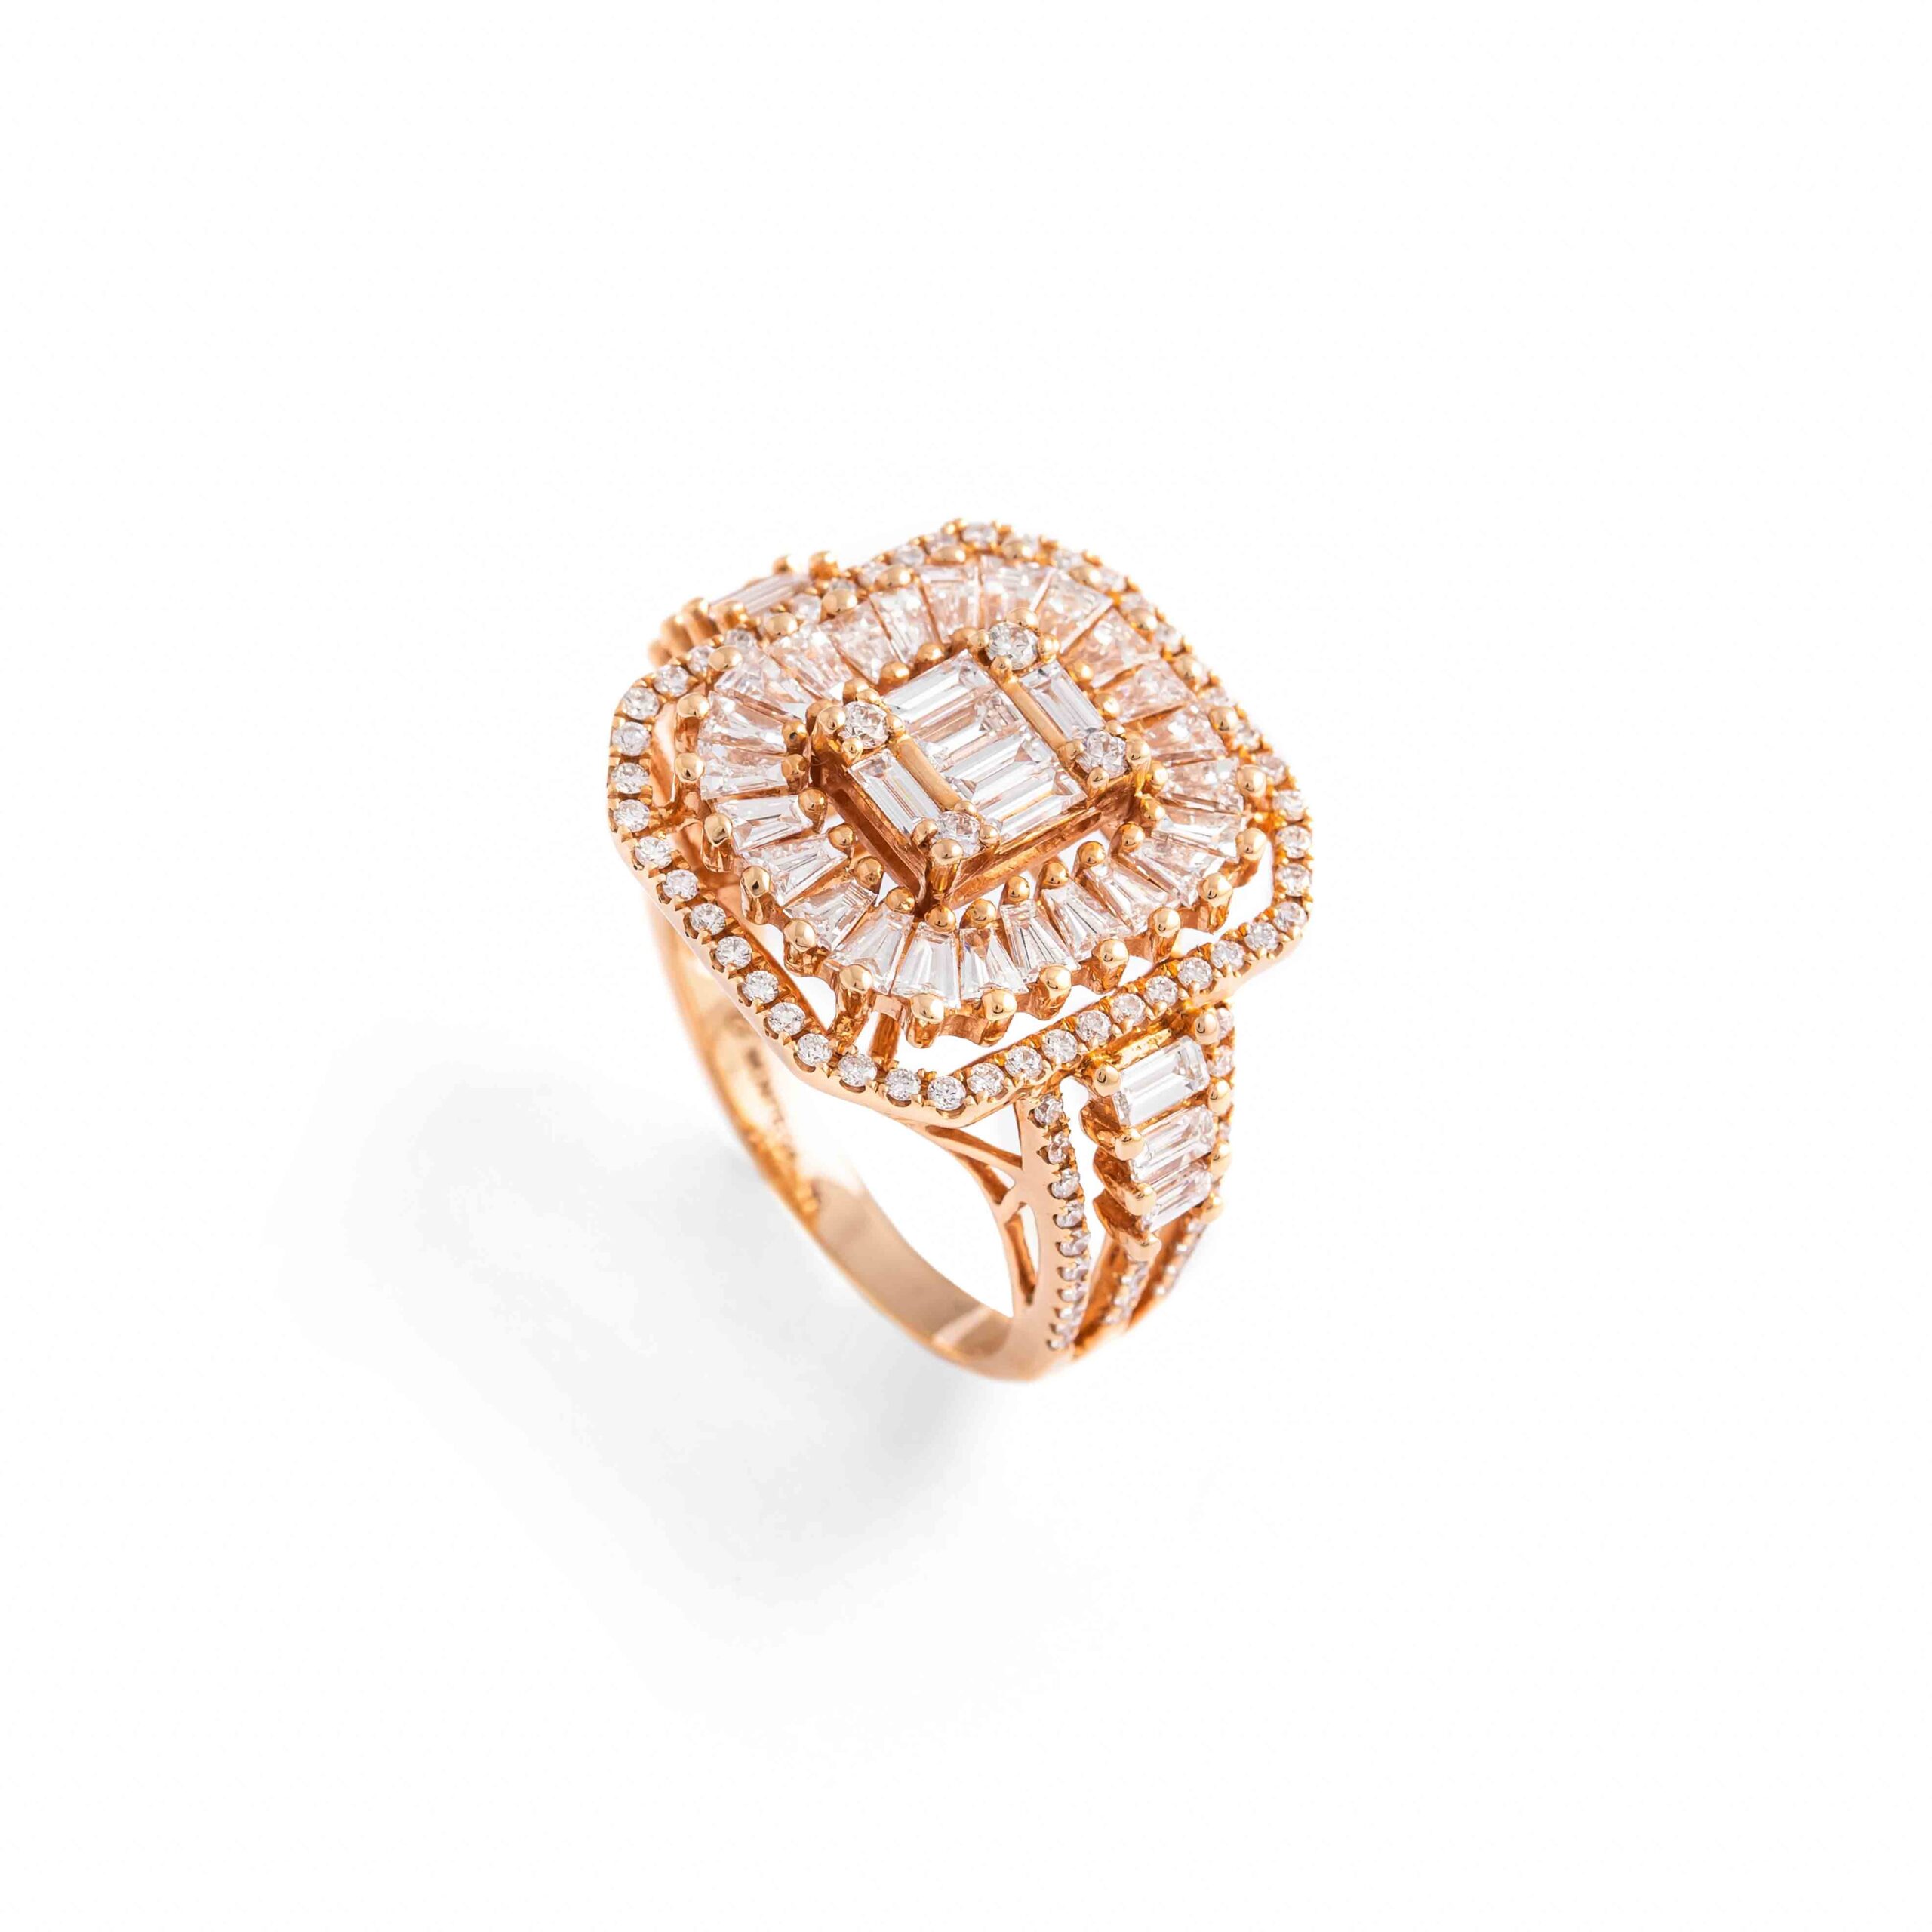 Diamond Pink Gold Ring. The center stage is adorned with 36 baguette-cut diamonds, totaling an impressive 1.47 carats.Surrounding the baguette-cut diamonds are 100 additional diamonds, totaling 0.49 carats.